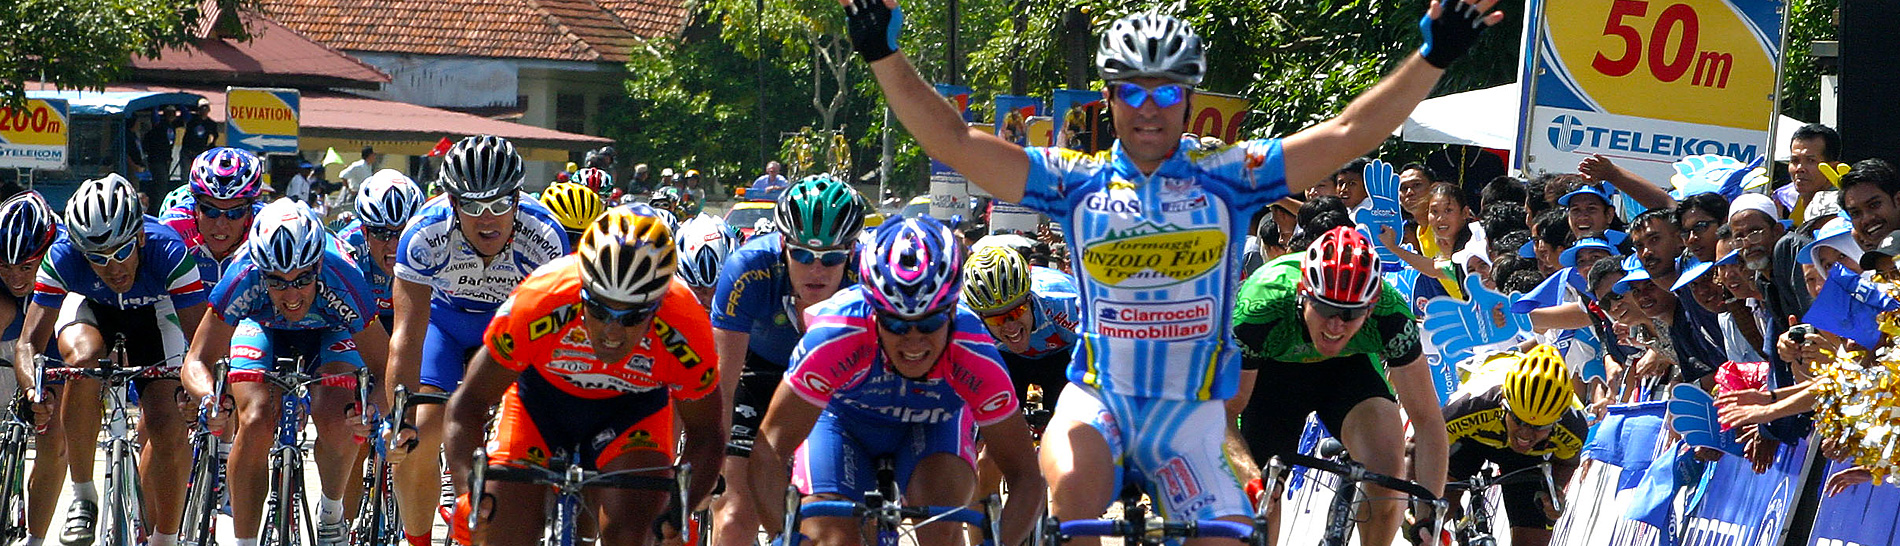 riders finishing a stage on the Le Tour de Langkawi